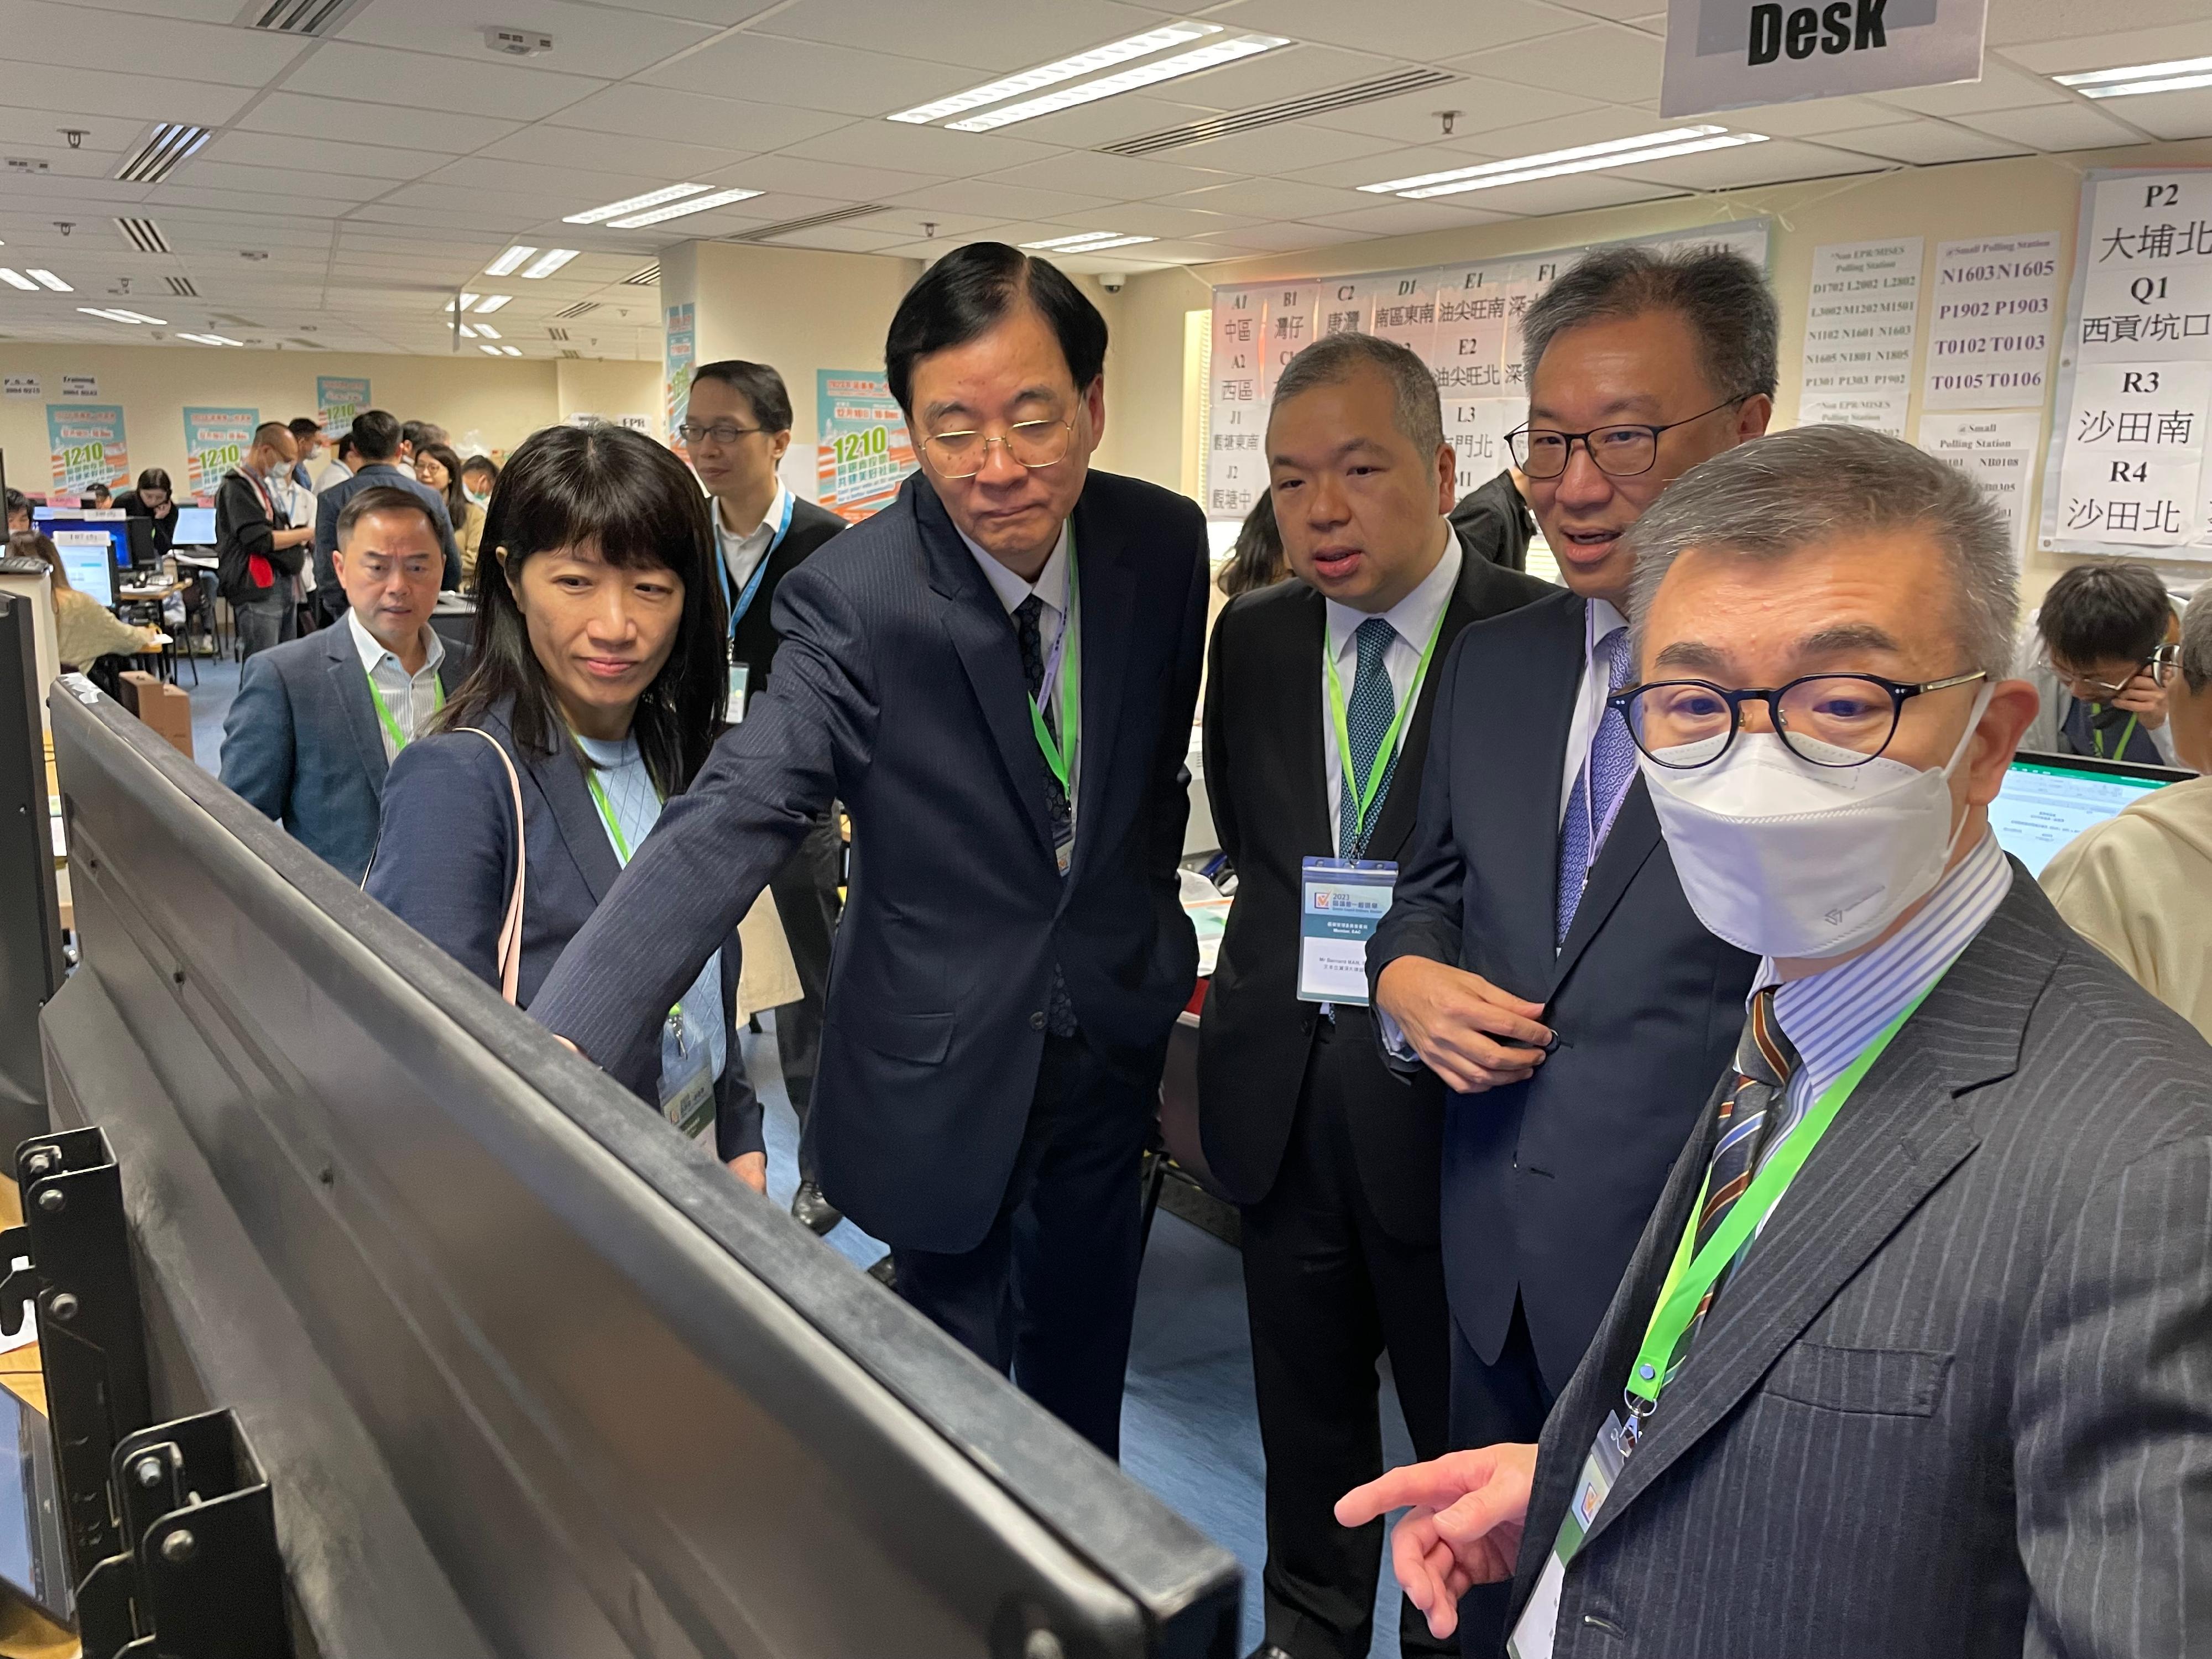 The Chairman of the Electoral Affairs Commission (EAC), Mr Justice David Lok (second right), EAC members Professor Daniel Shek (fourth right) and Mr Bernard Man, SC (third right), visit the Central Command Centre and Statistical Information Centre of the 2023 District Council Ordinary Election at the Kowloonbay International Trade and Exhibition Centre this morning (December 10) to learn about the operation. Also present is the Chief Electoral Officer of the Registration and Electoral Office, Mr Raymond Wang (first right).